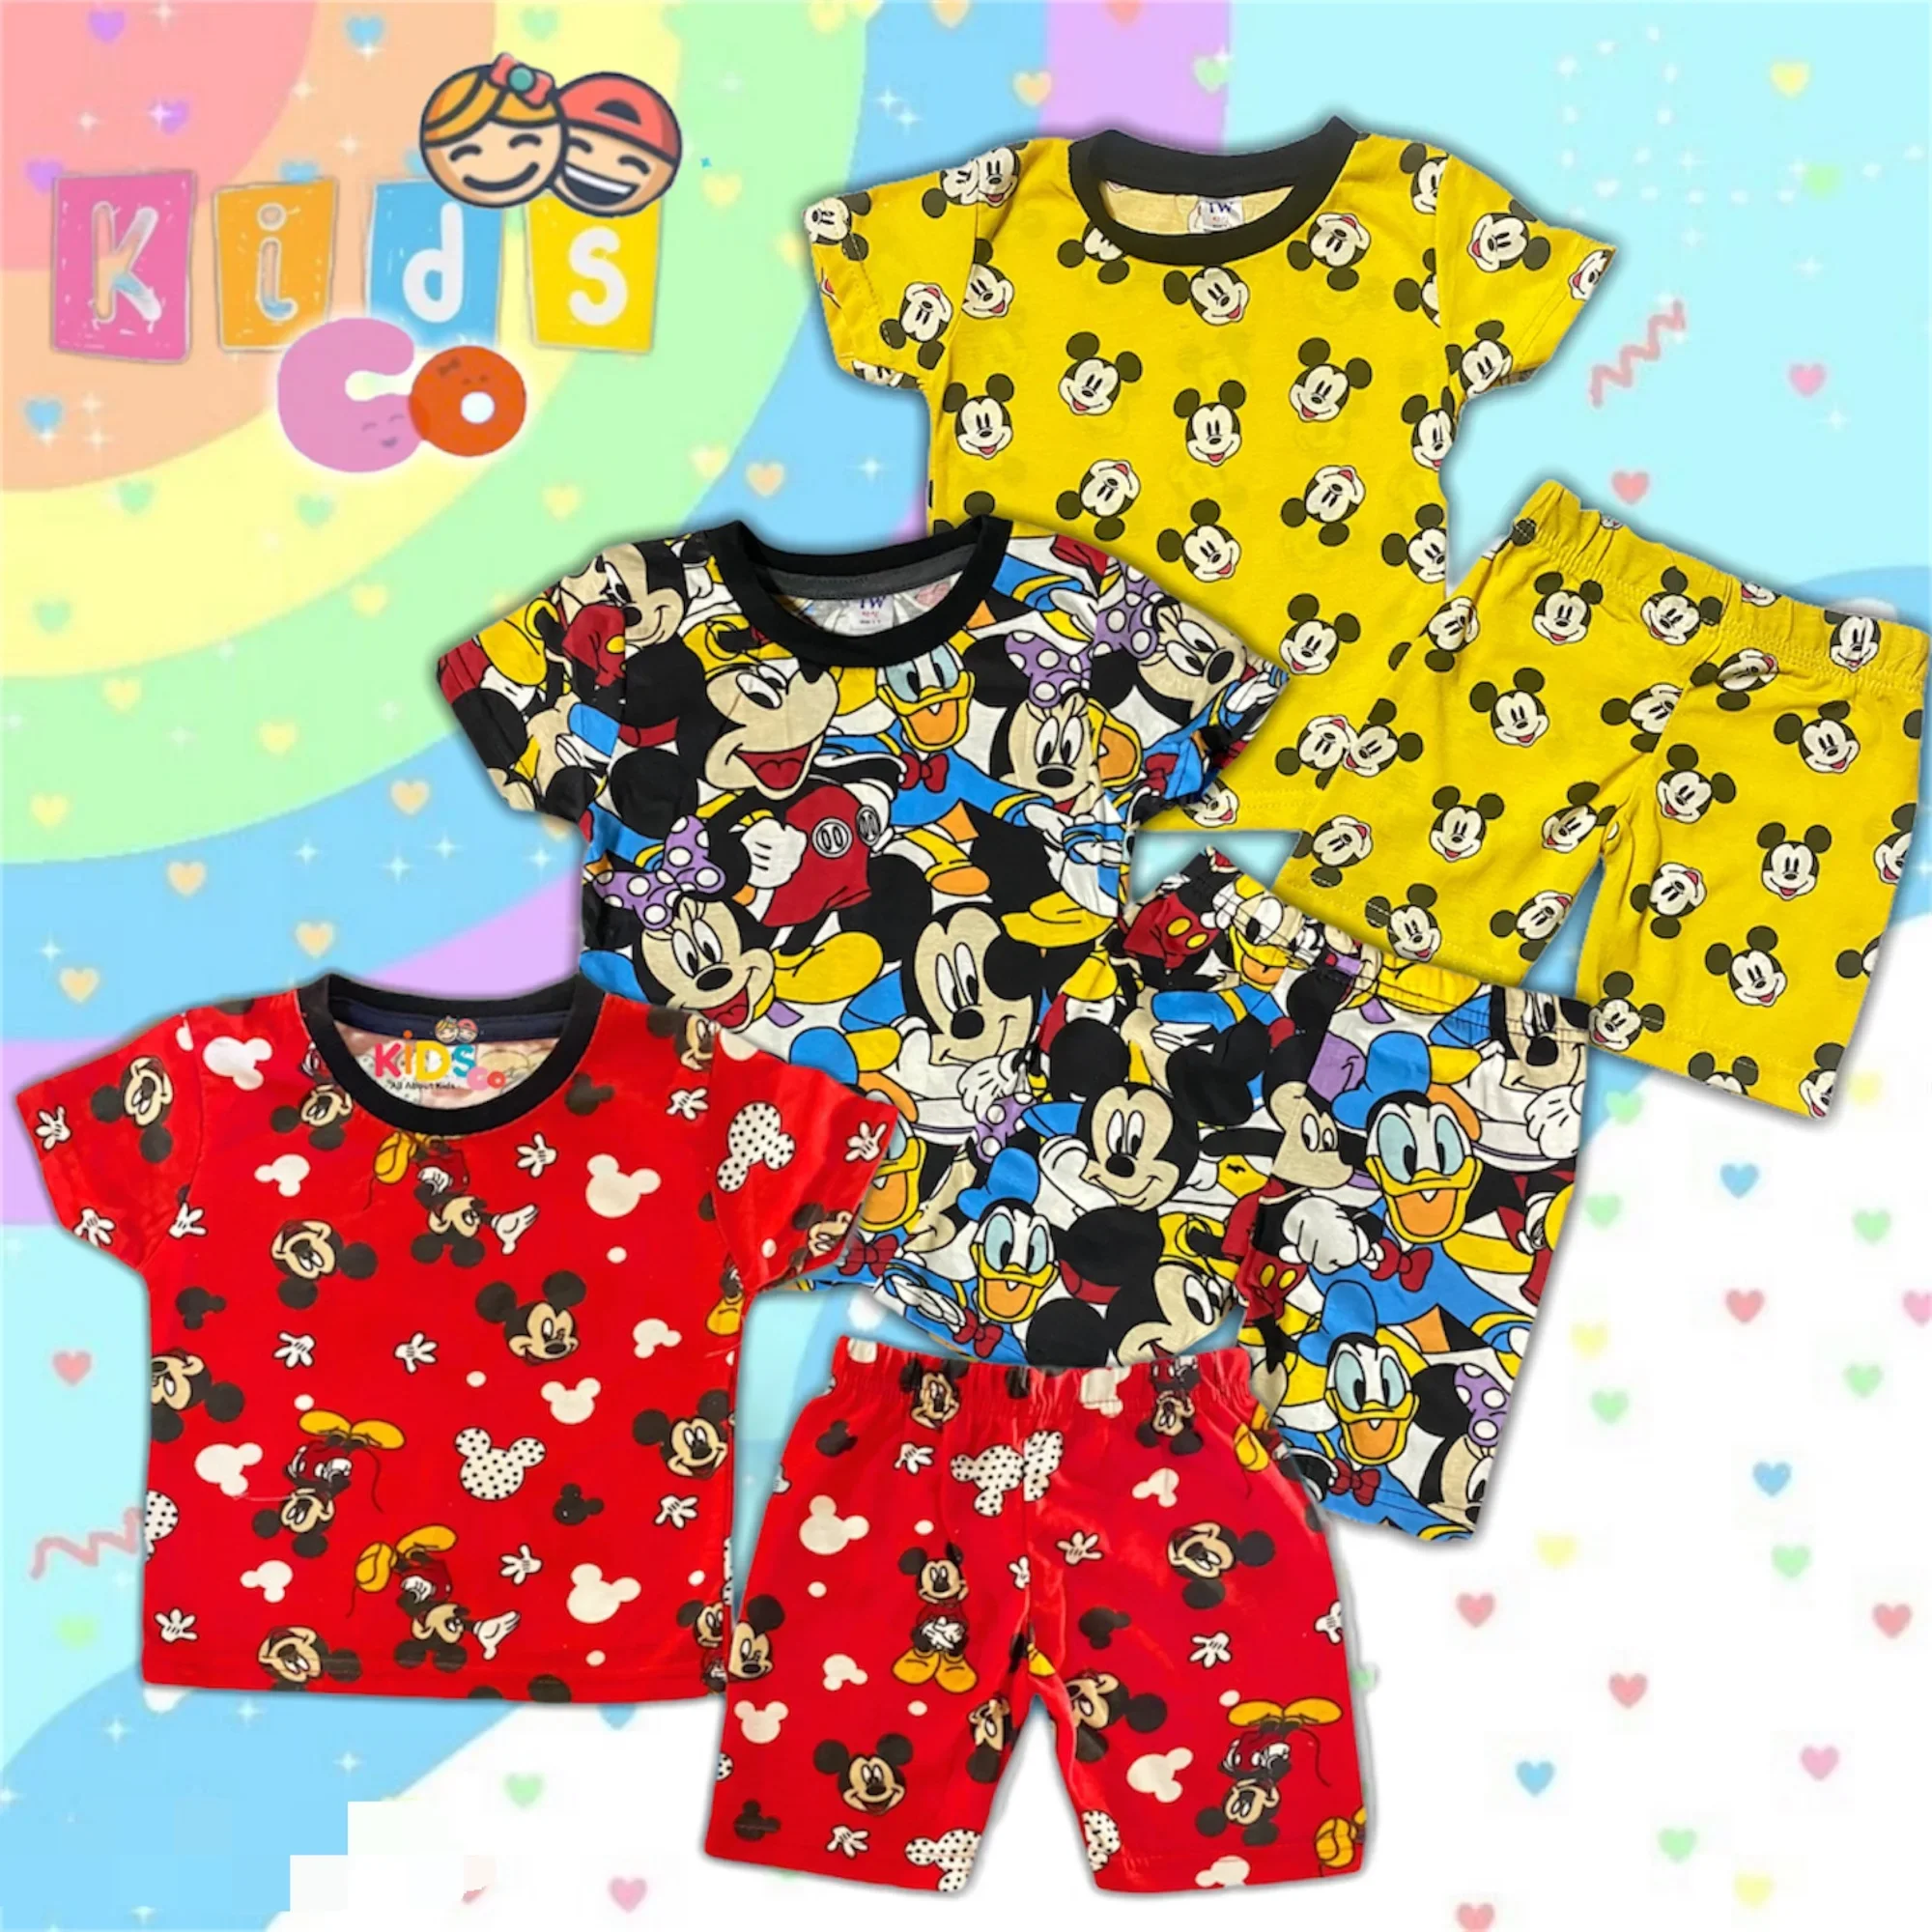 Readystock Playset Cotton Printed Harian Kids Size